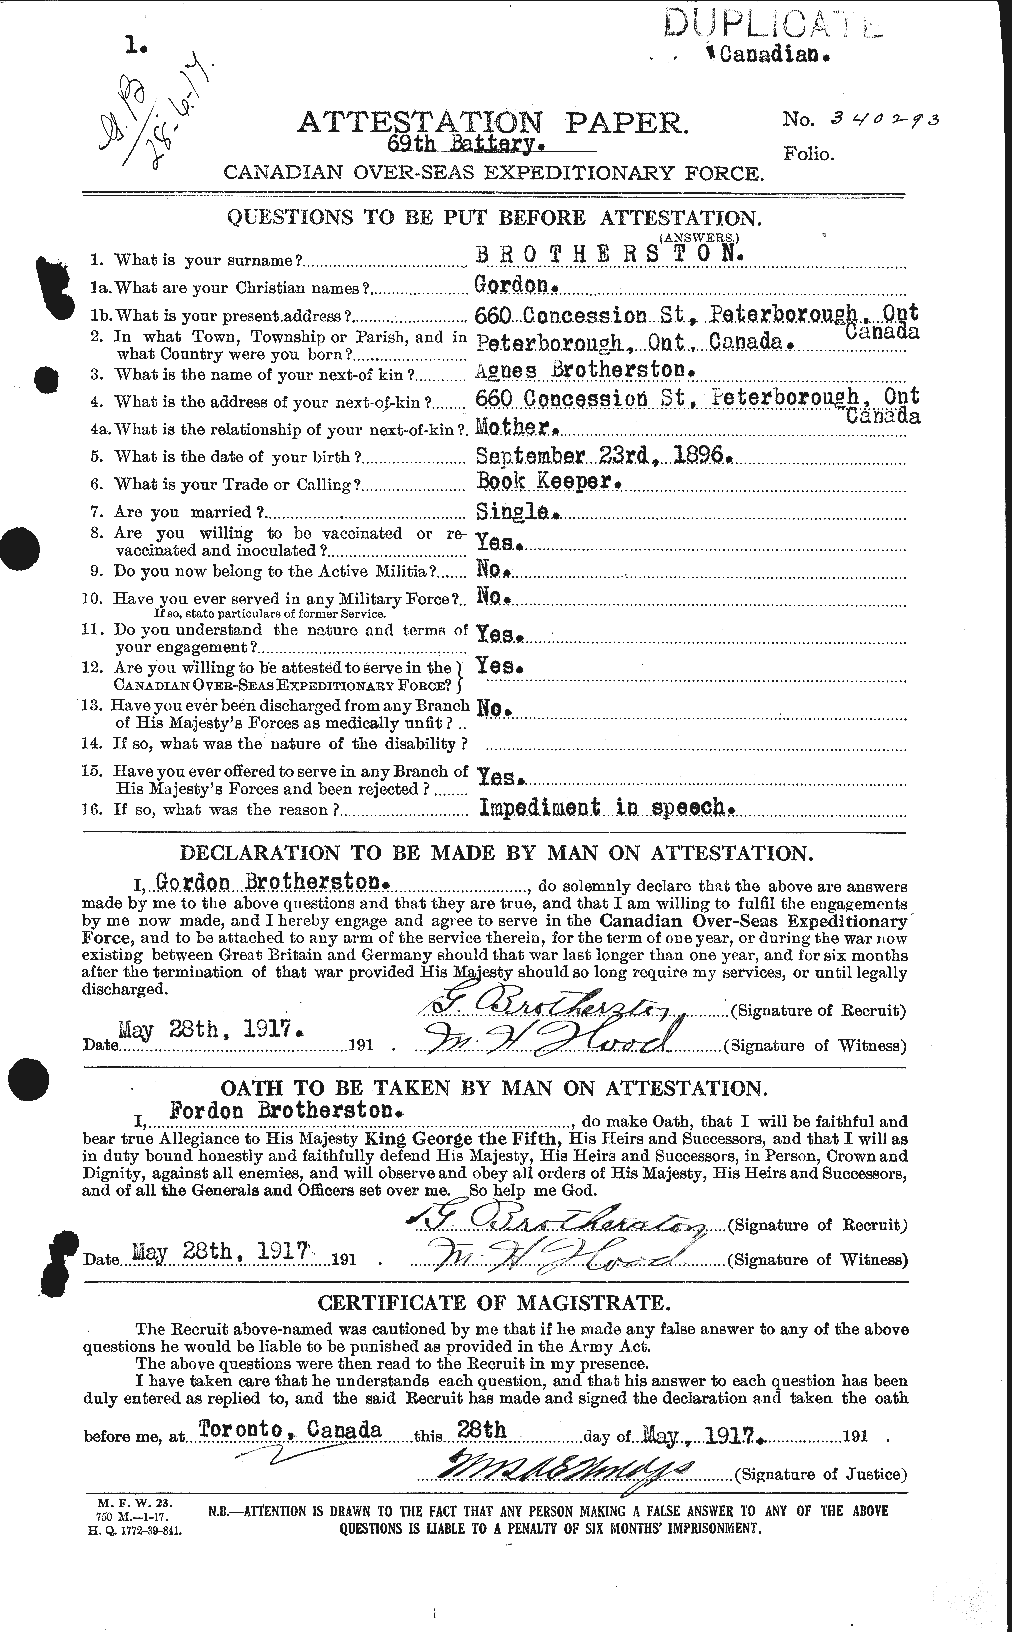 Personnel Records of the First World War - CEF 264982a